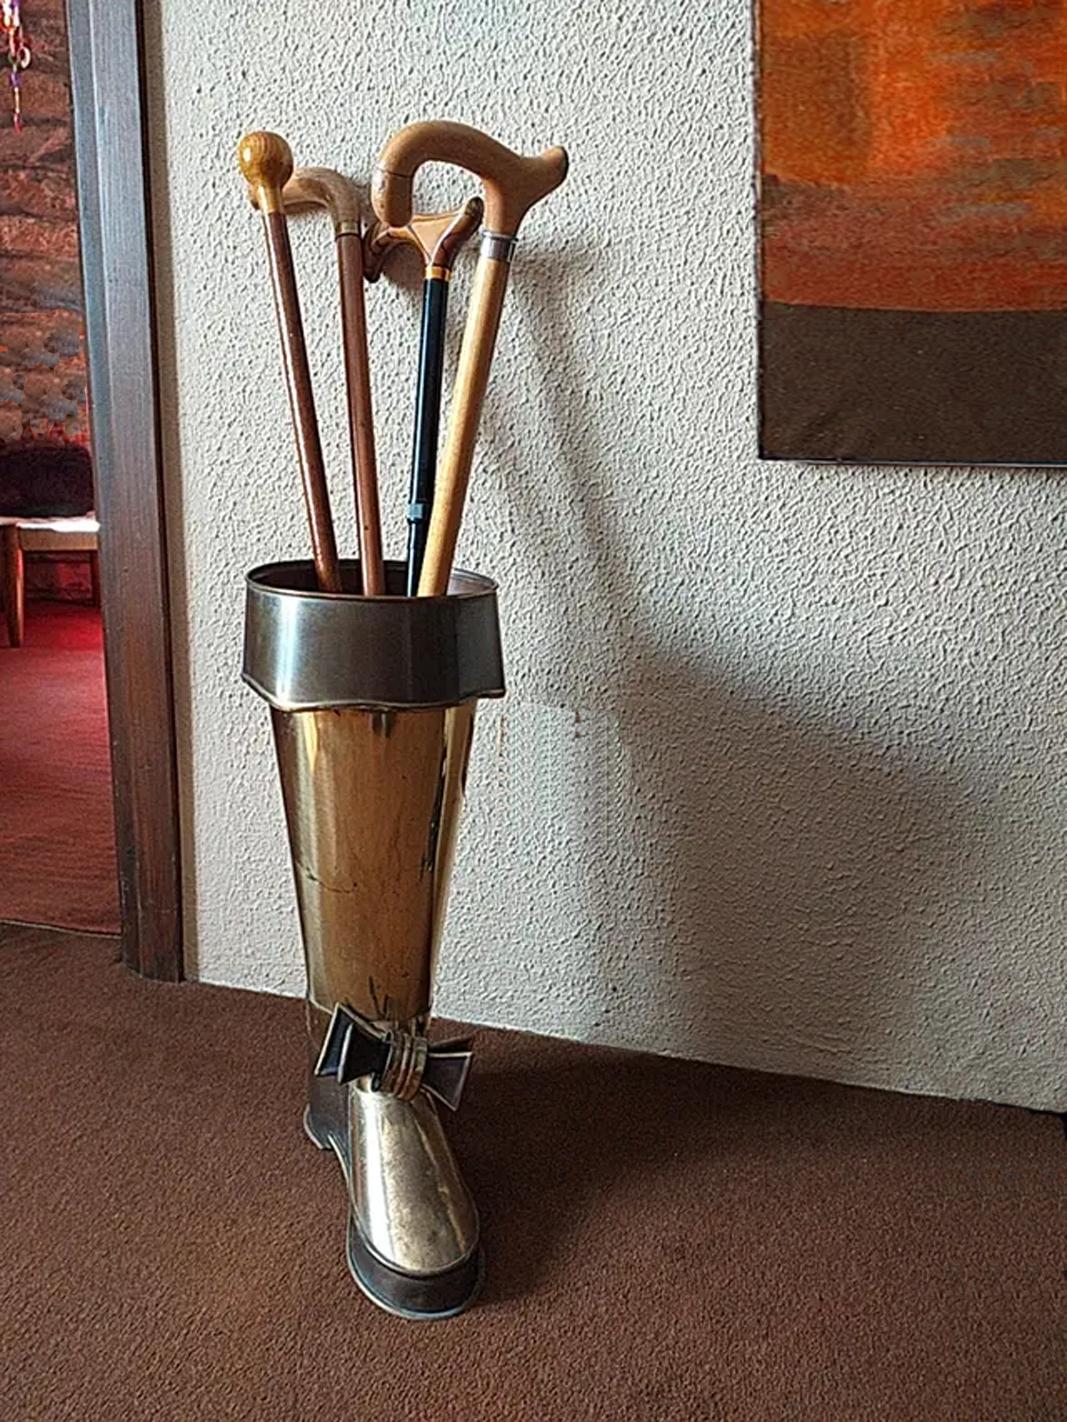 Midcentury brass umbrella stand, boot form

 Made hammered brass, shaped like a very beautiful and elegant boot

Made in Spain 1970s hand-hammered solid brass boot umbrella holder.

Very good conditions.
 